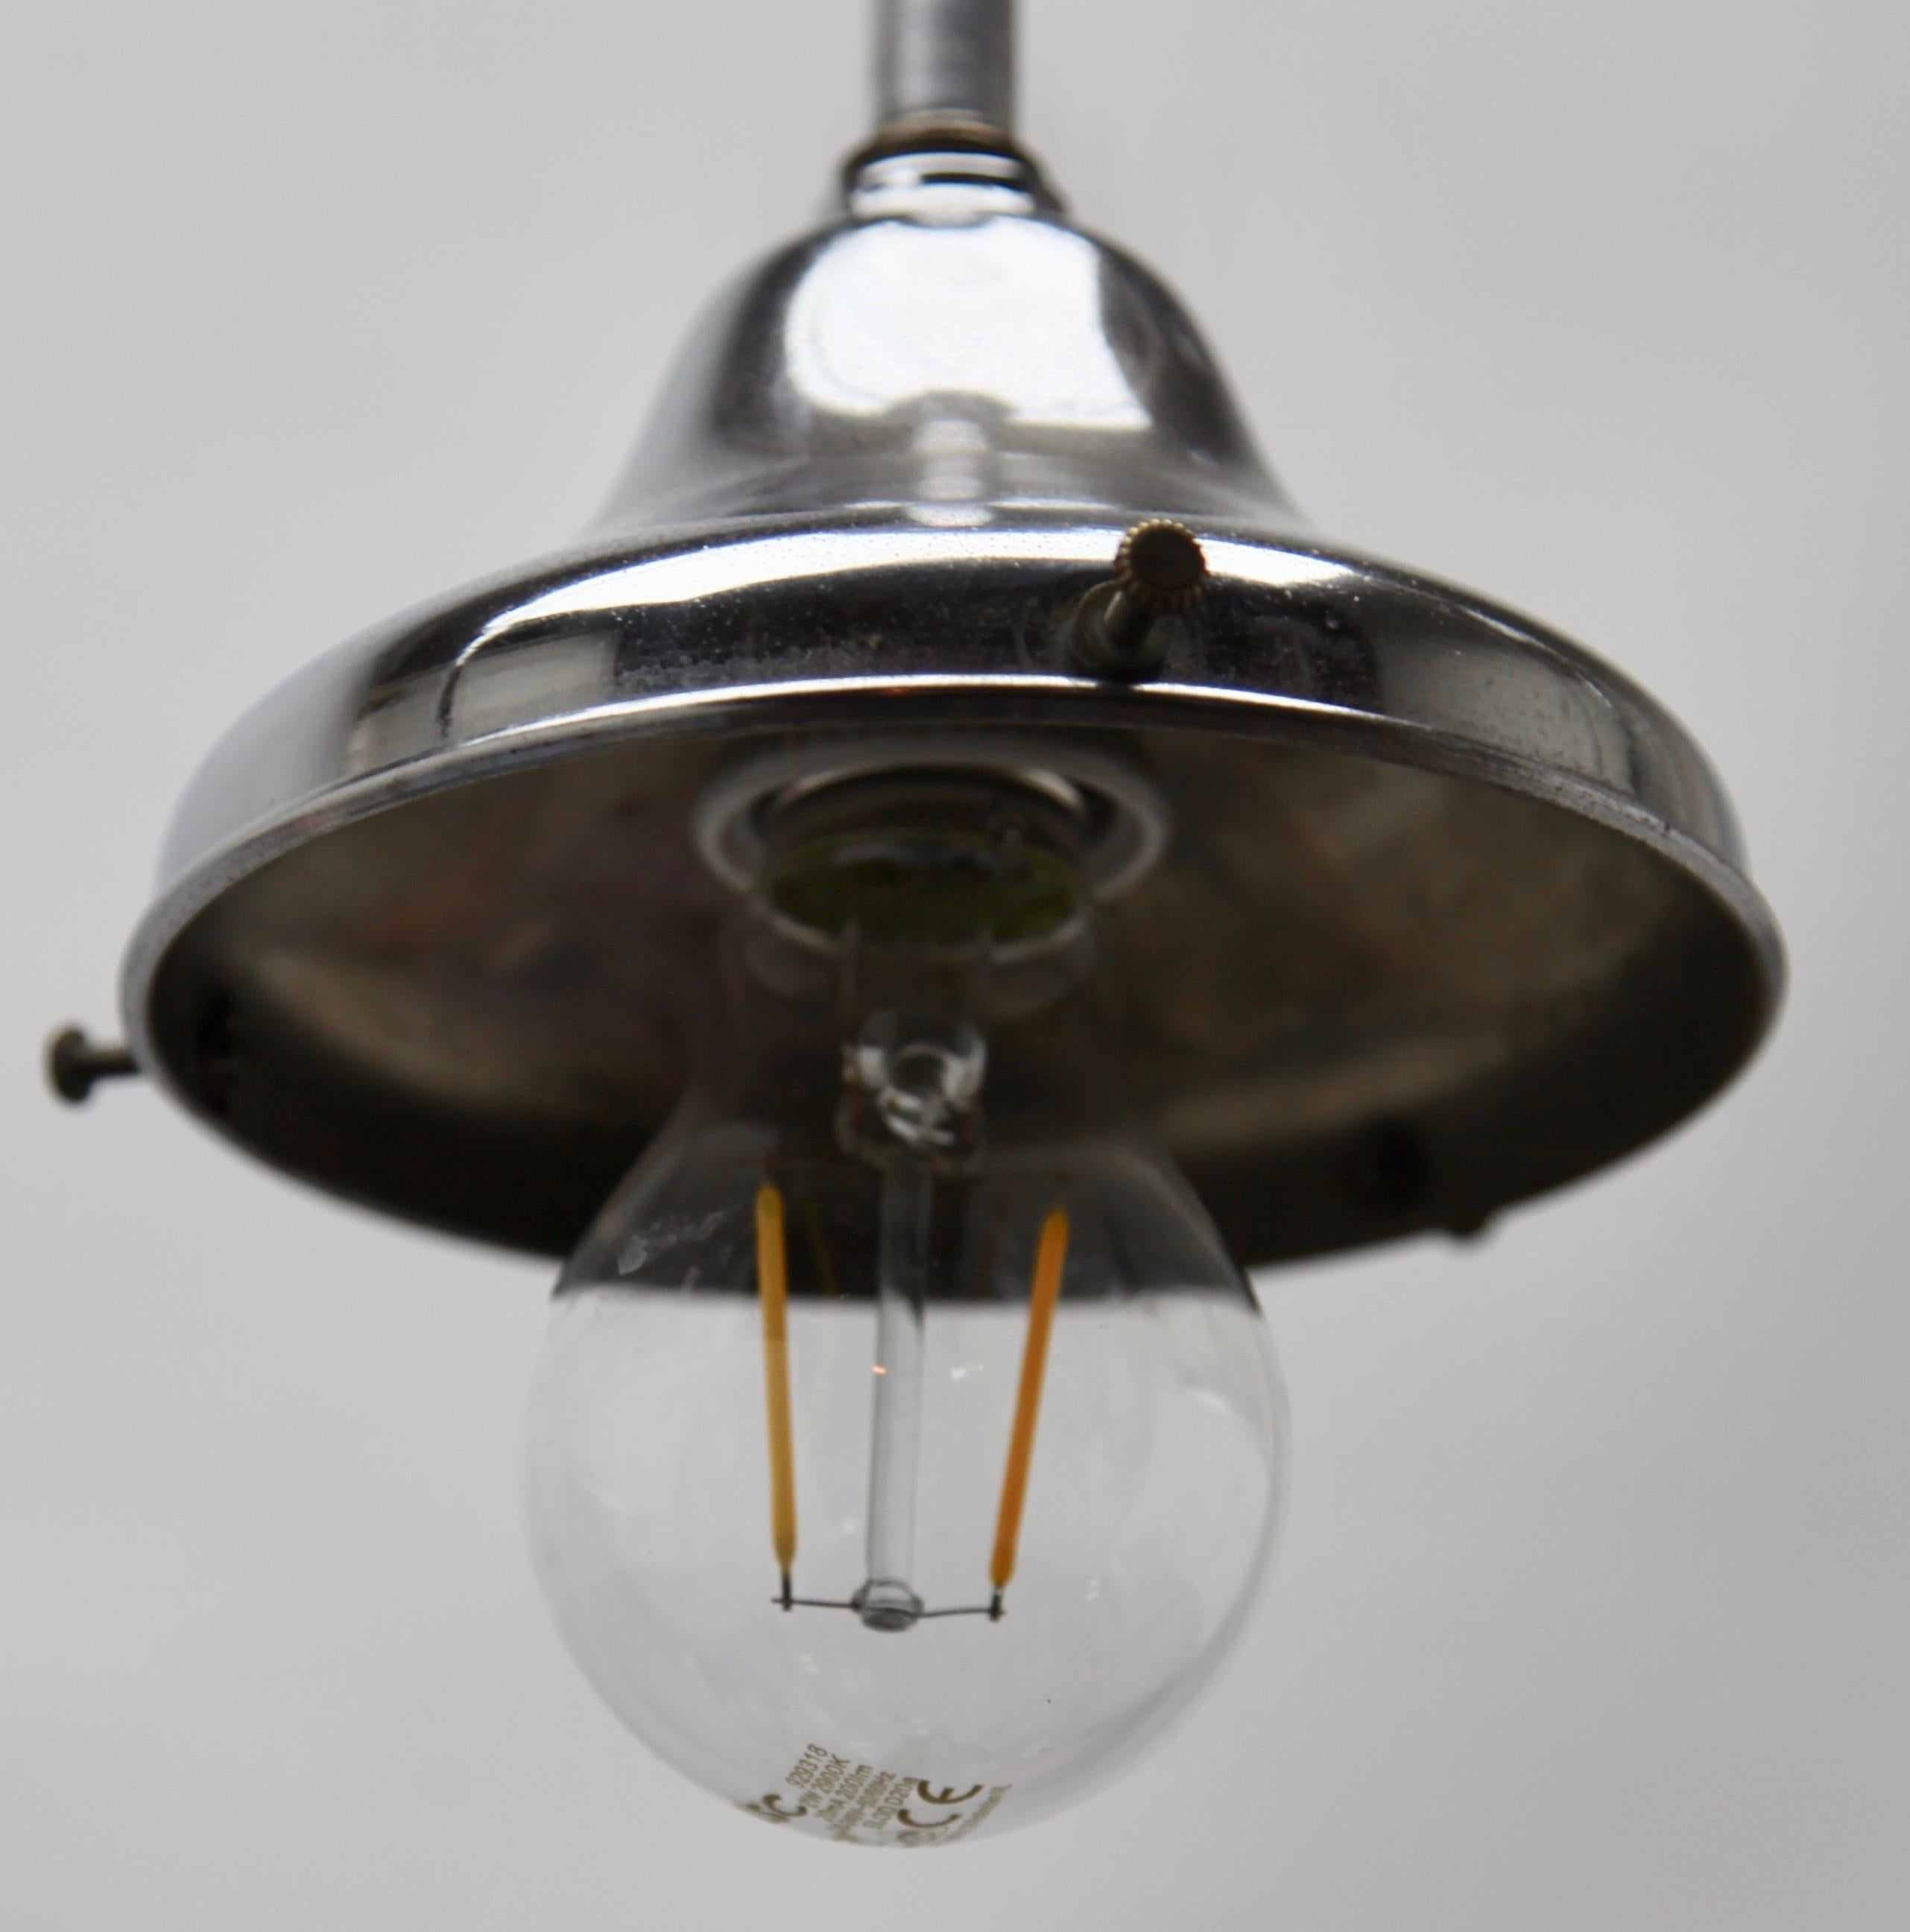 Phillips Pendant Stem Lamp with a Globular Opaline Shade, 1930s, Netherlands For Sale 3